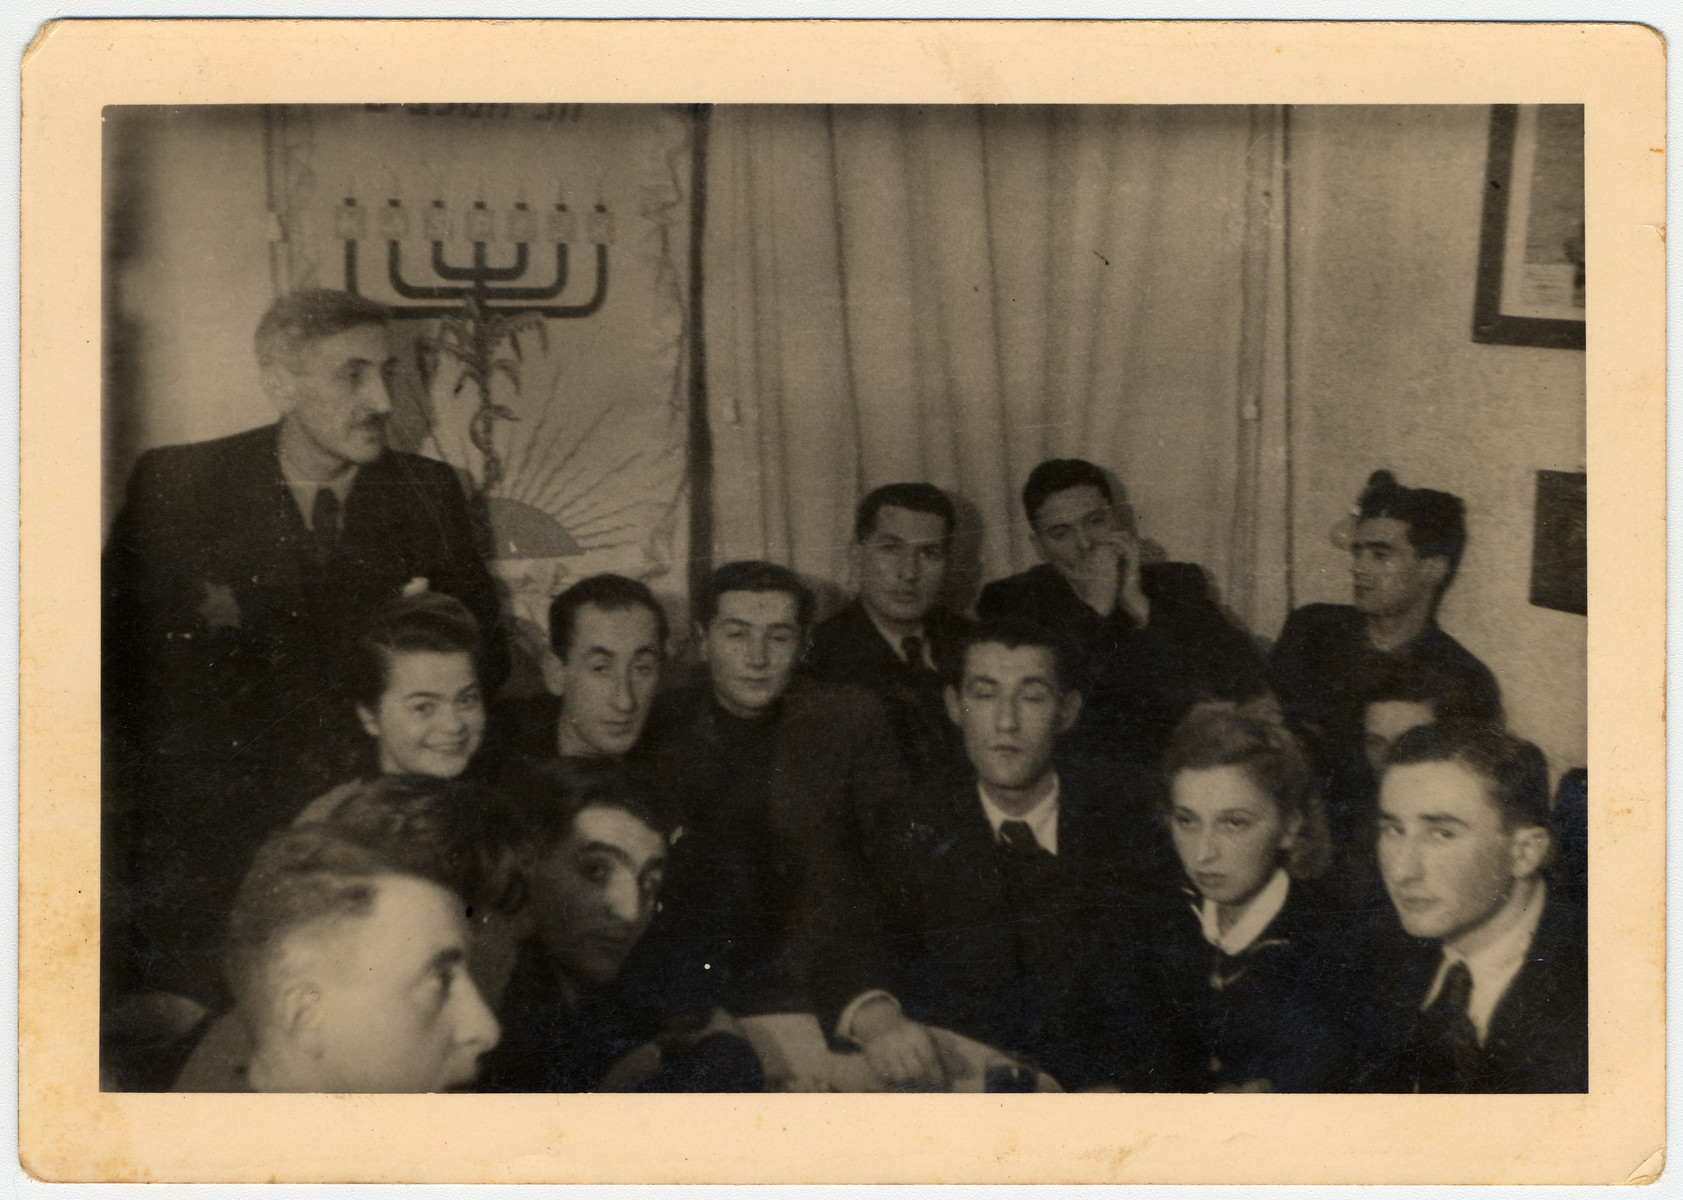 Members of a Zionist group in the Lodz ghetto at a Hanukkah gathering.

Among those pictured is Yehoshua Klugman (standing, left).  Seating in the first row are Ester Grynsztajn (first from left) and Aron Jakubson (second from left in the second row).  Seated in the first row on the right are Wiktor Sztajn, Mirka Sztajn and Libicki.  Pictured seated in the second row on the right are Chaim Rozenowicz and next to him, against the wall, is Arie Princ (later Ben Menachem).  The banner in the back reads: "1943--Festival of the Maccabees."  Latin letters on the branches of the menorah spell "KASPIJK," possibly the name of the group or chapter of the organization.